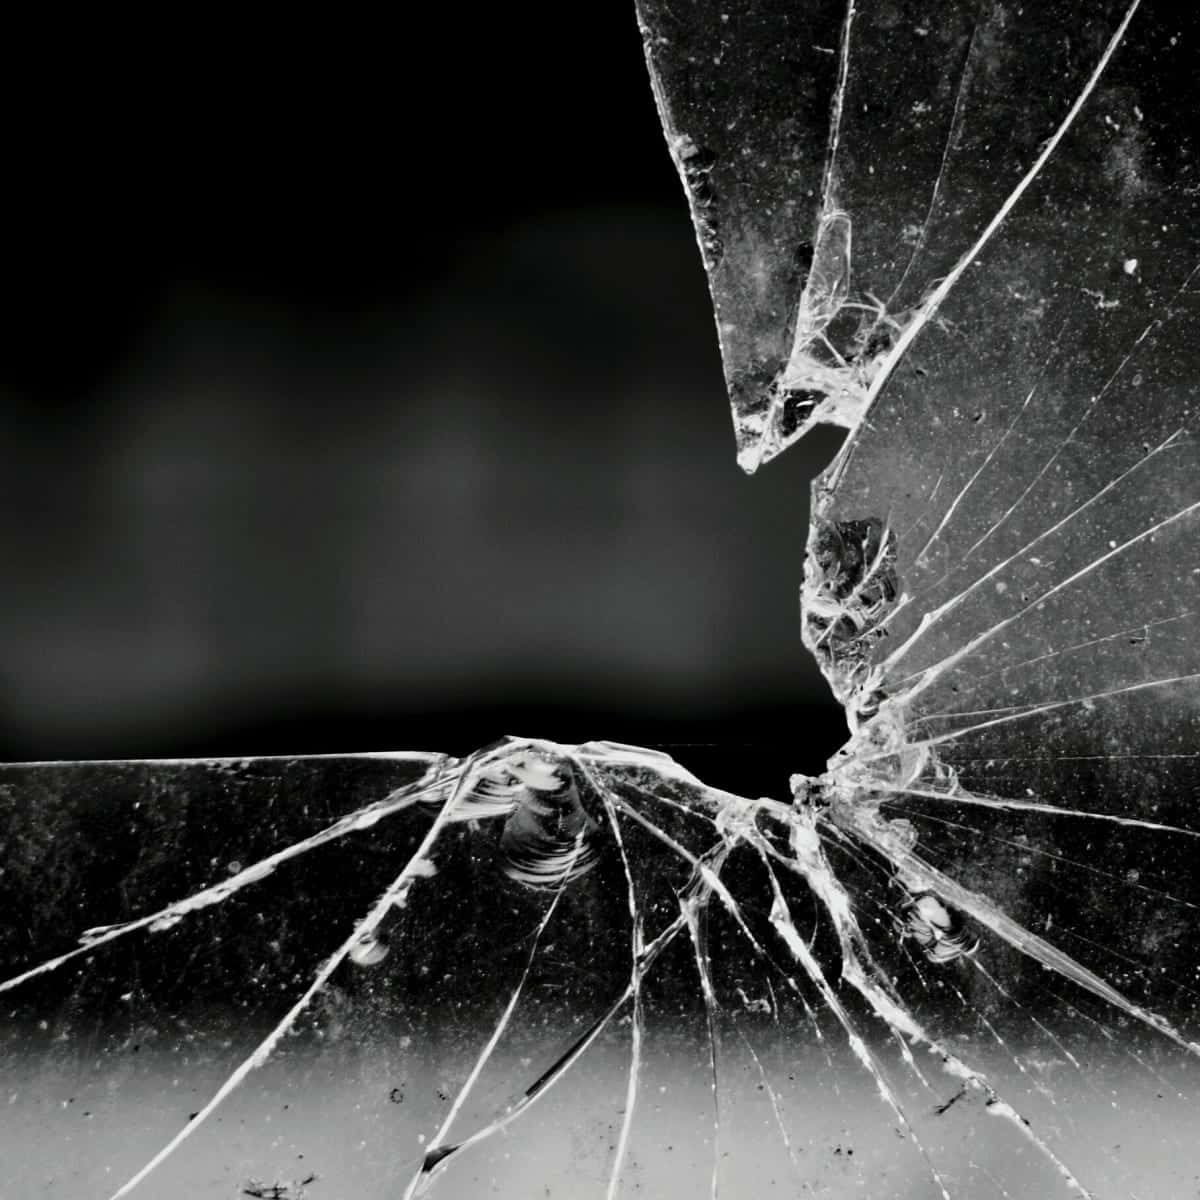 Fracture Glass Bullet Hole Picture